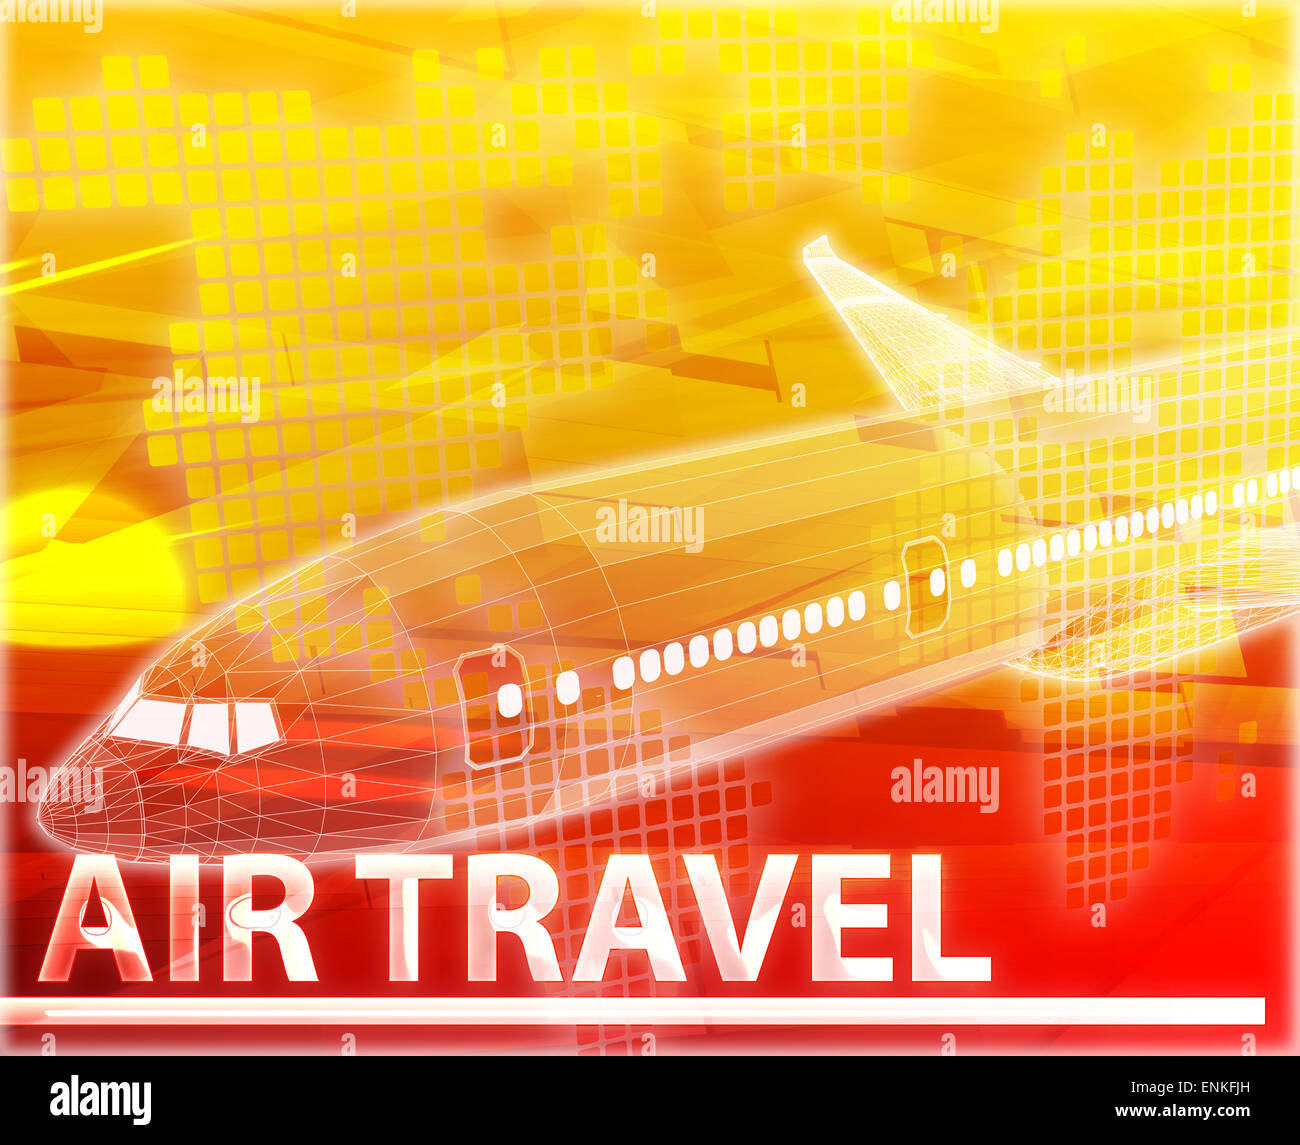 Abstract background digital collage concept illustration air travel Stock Photo